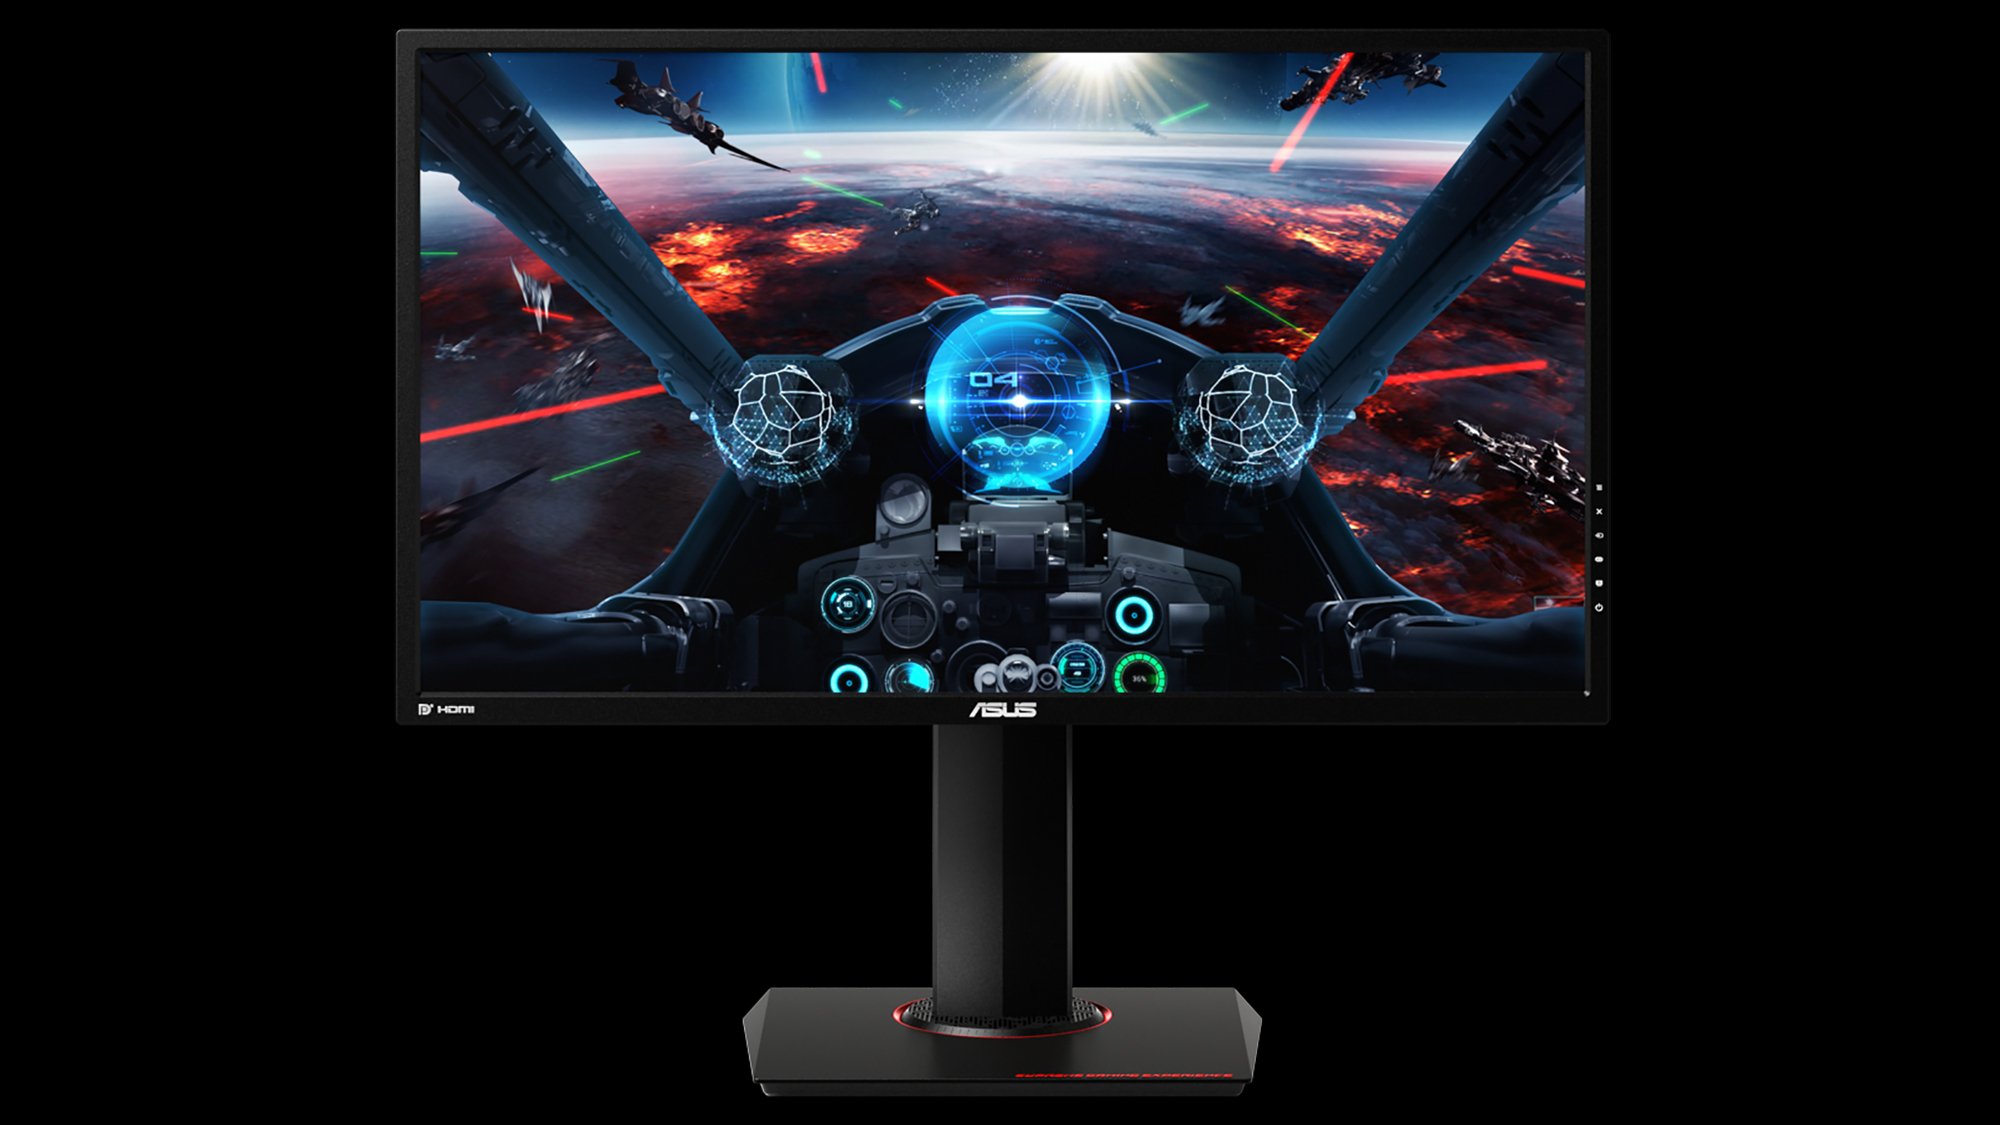 asus-announces-three-new-gaming-monitors-with-gamevisual-technology